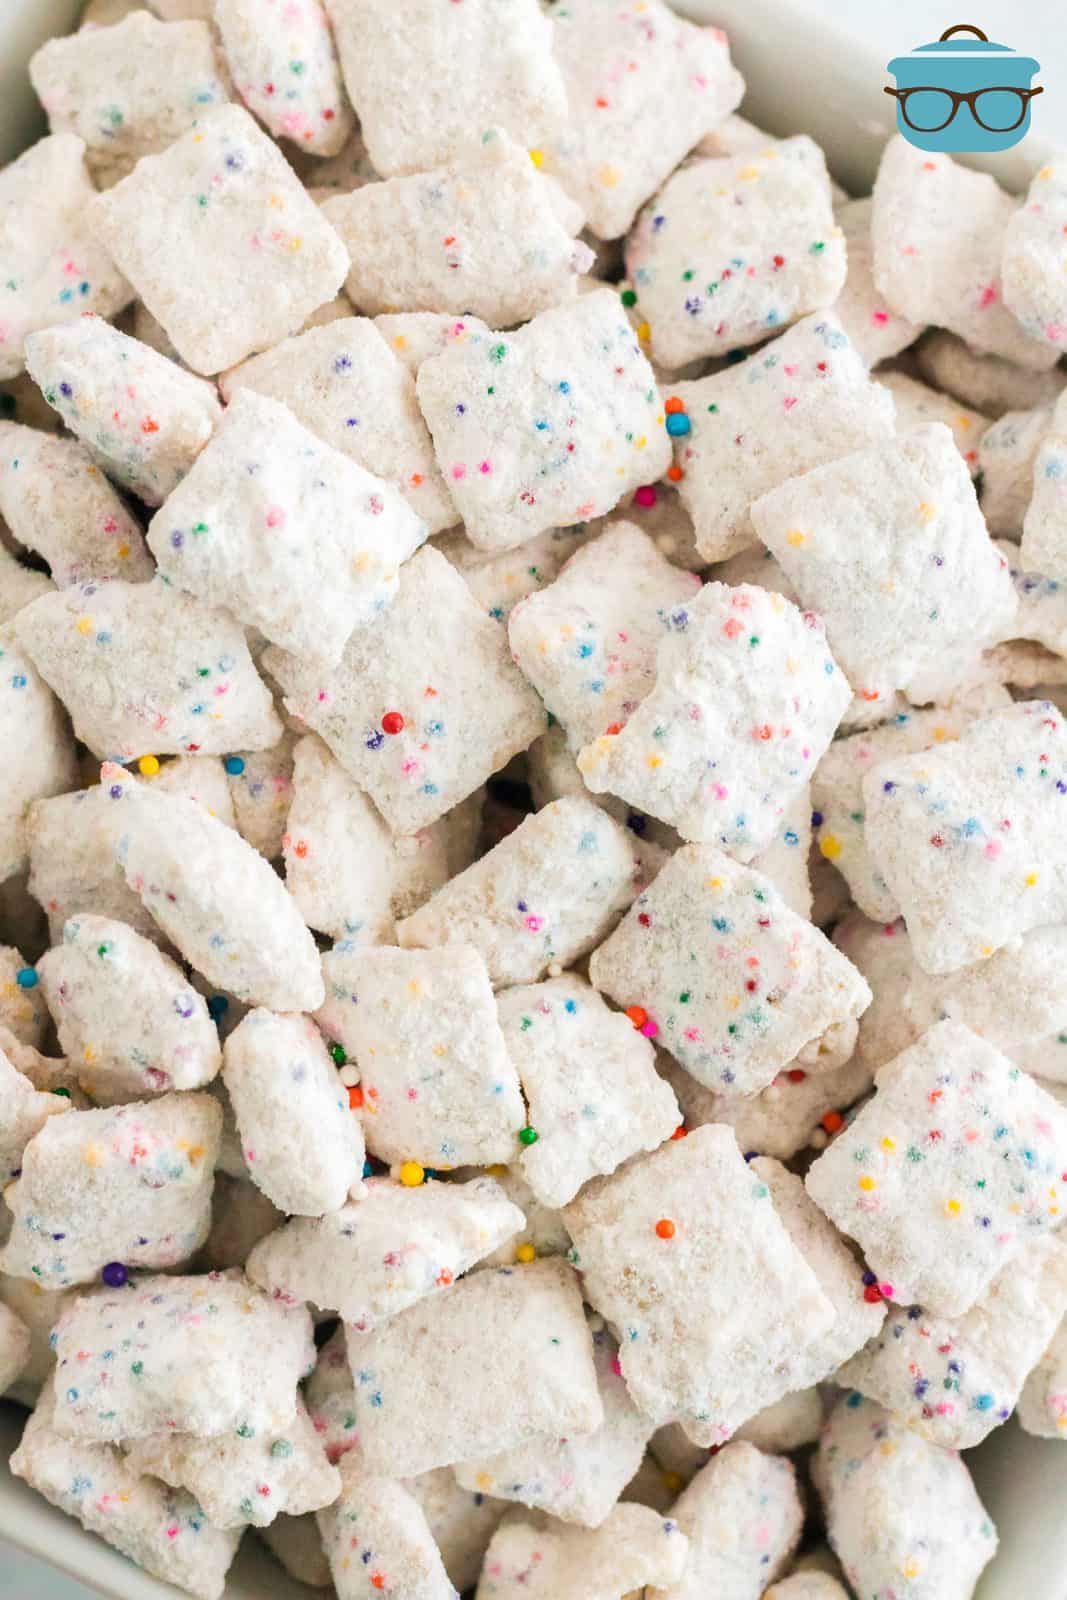 Spread out close up of Funfetti Puppy Chow.